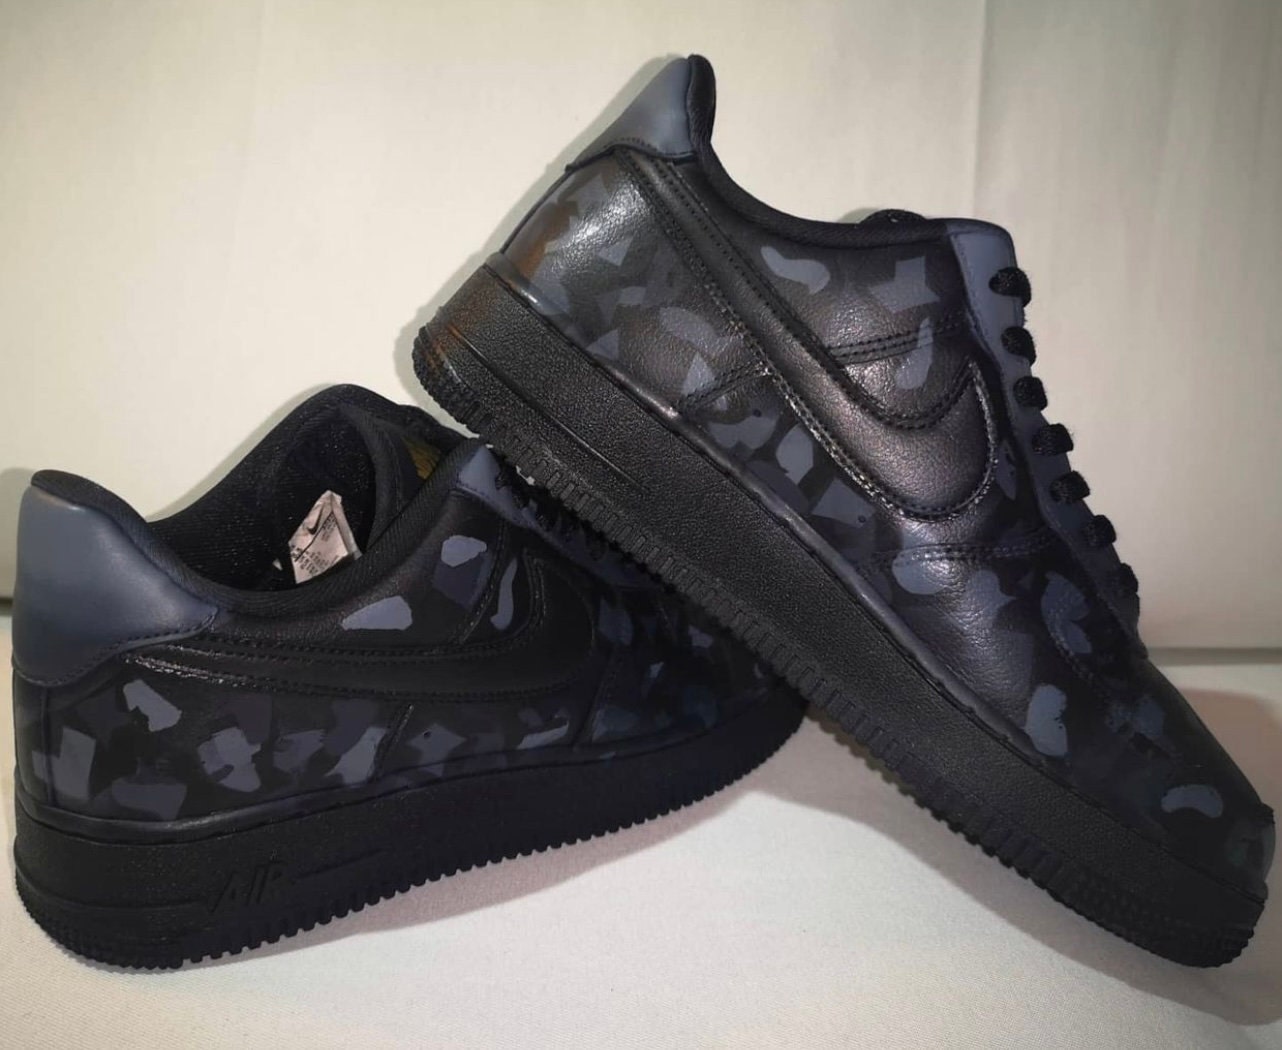 Louis Vuitton Air Force 1 - 5 For Sale on 1stDibs  air force 1 louis  vuitton fake, air force 1 louis vuitton precio, friends and family lv af1